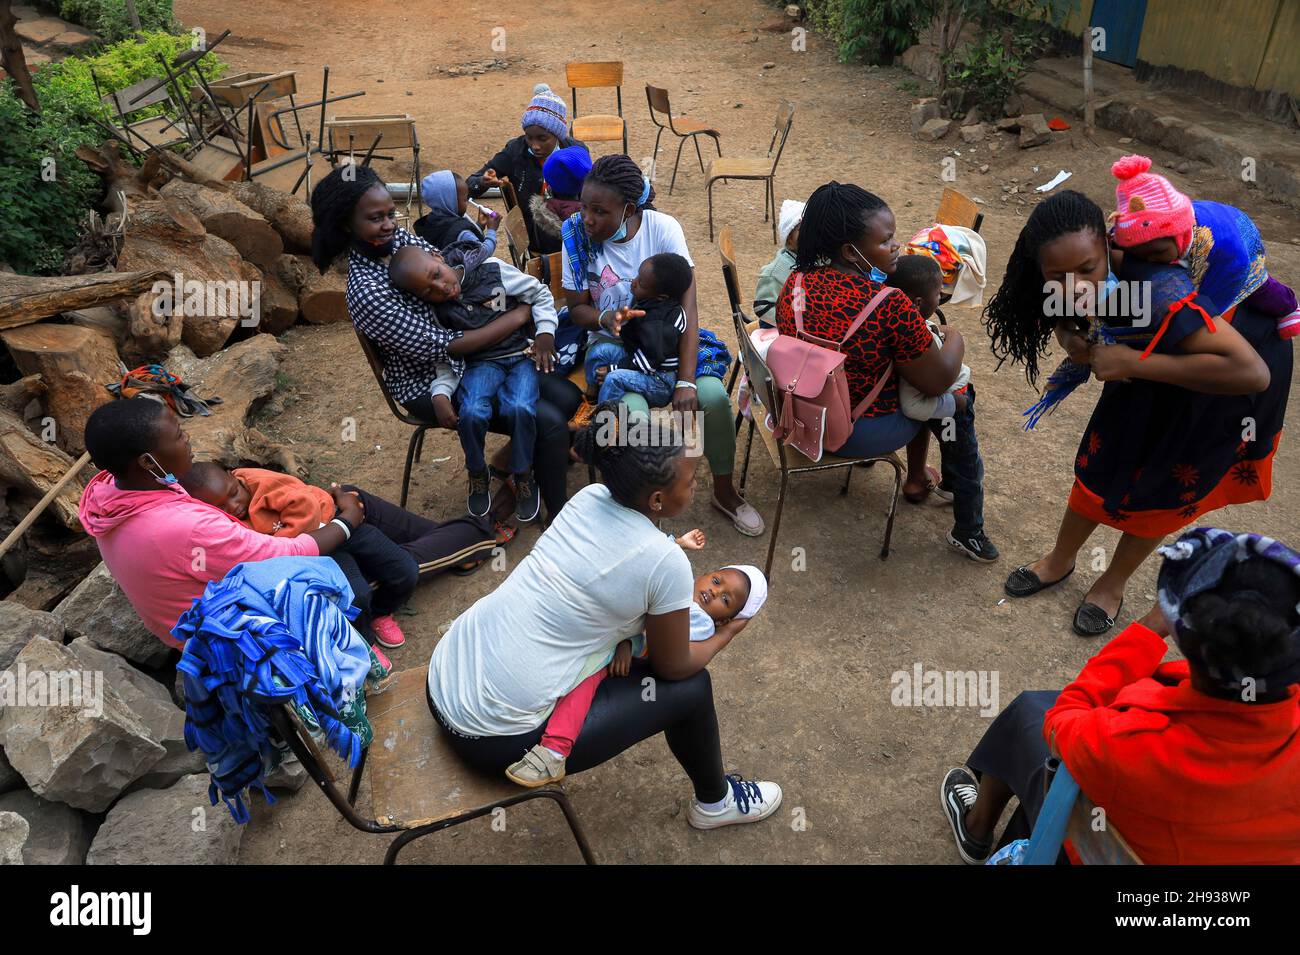 July 23, 2021, Nairobi, Kenya: Women seen waiting with their kids during the event.Cerebral palsy is an abnormal development of brain tissue that affects children making them unable to control their muscles, this usually occurs before or mostly after a child is born. A group of Medical experts and massage therapists from The Action Foundation (T.A.F) came together to help and supports different families with young kids suffering from Cerebral Palsy. Since most families are not able to afford the high costs of medical services and therapies for their babies with disabilities, The Action Founda Stock Photo